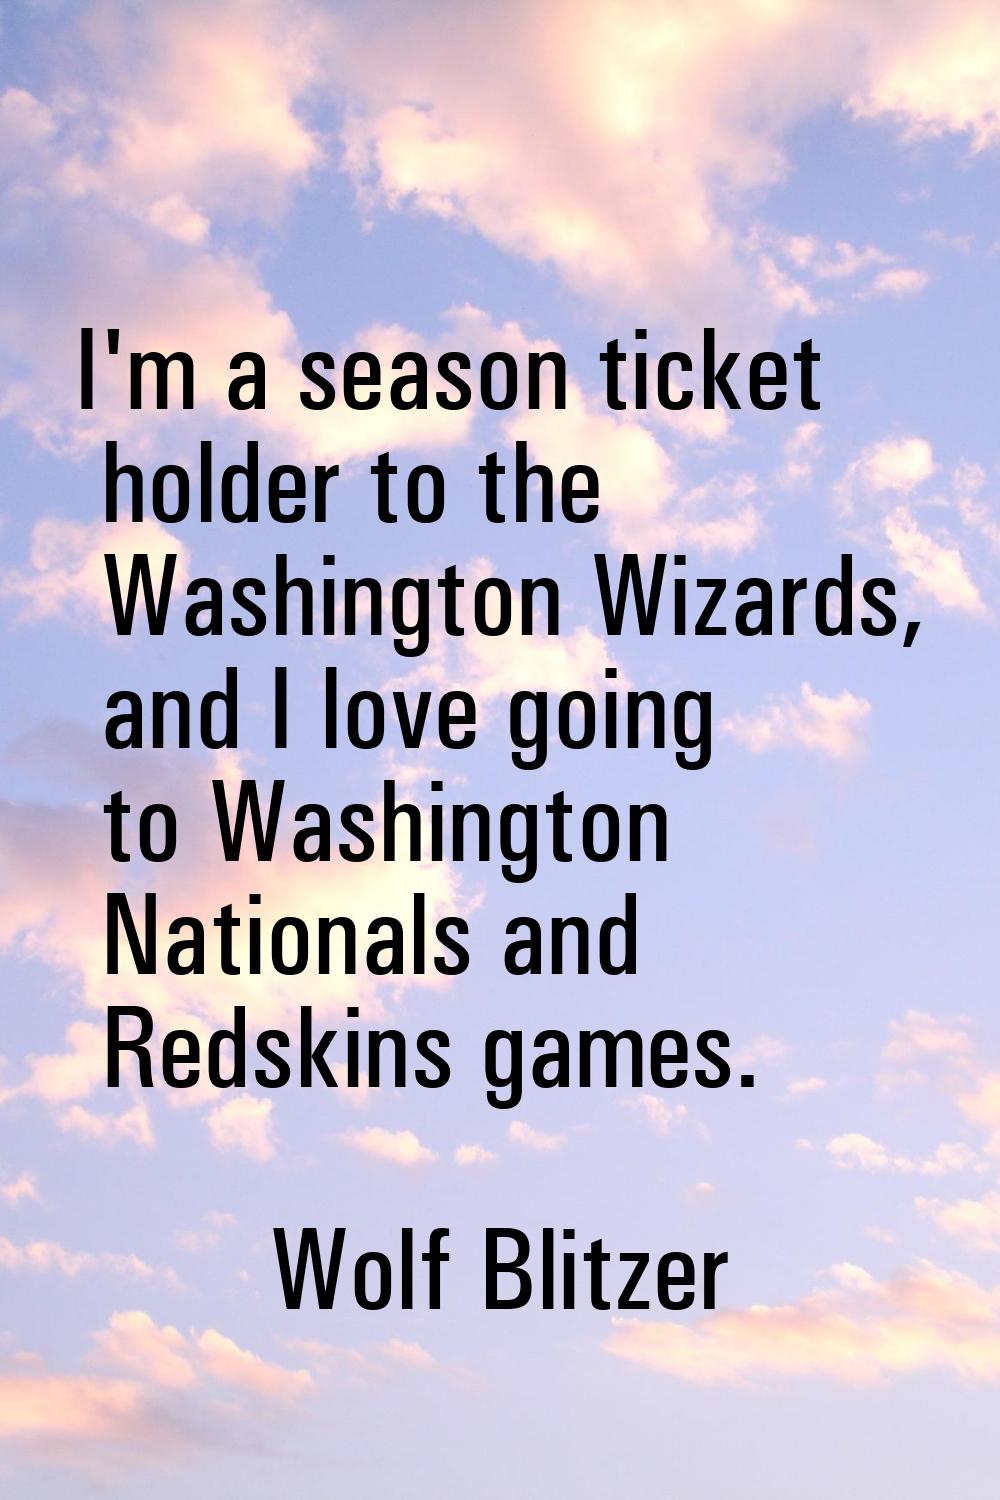 I'm a season ticket holder to the Washington Wizards, and I love going to Washington Nationals and 